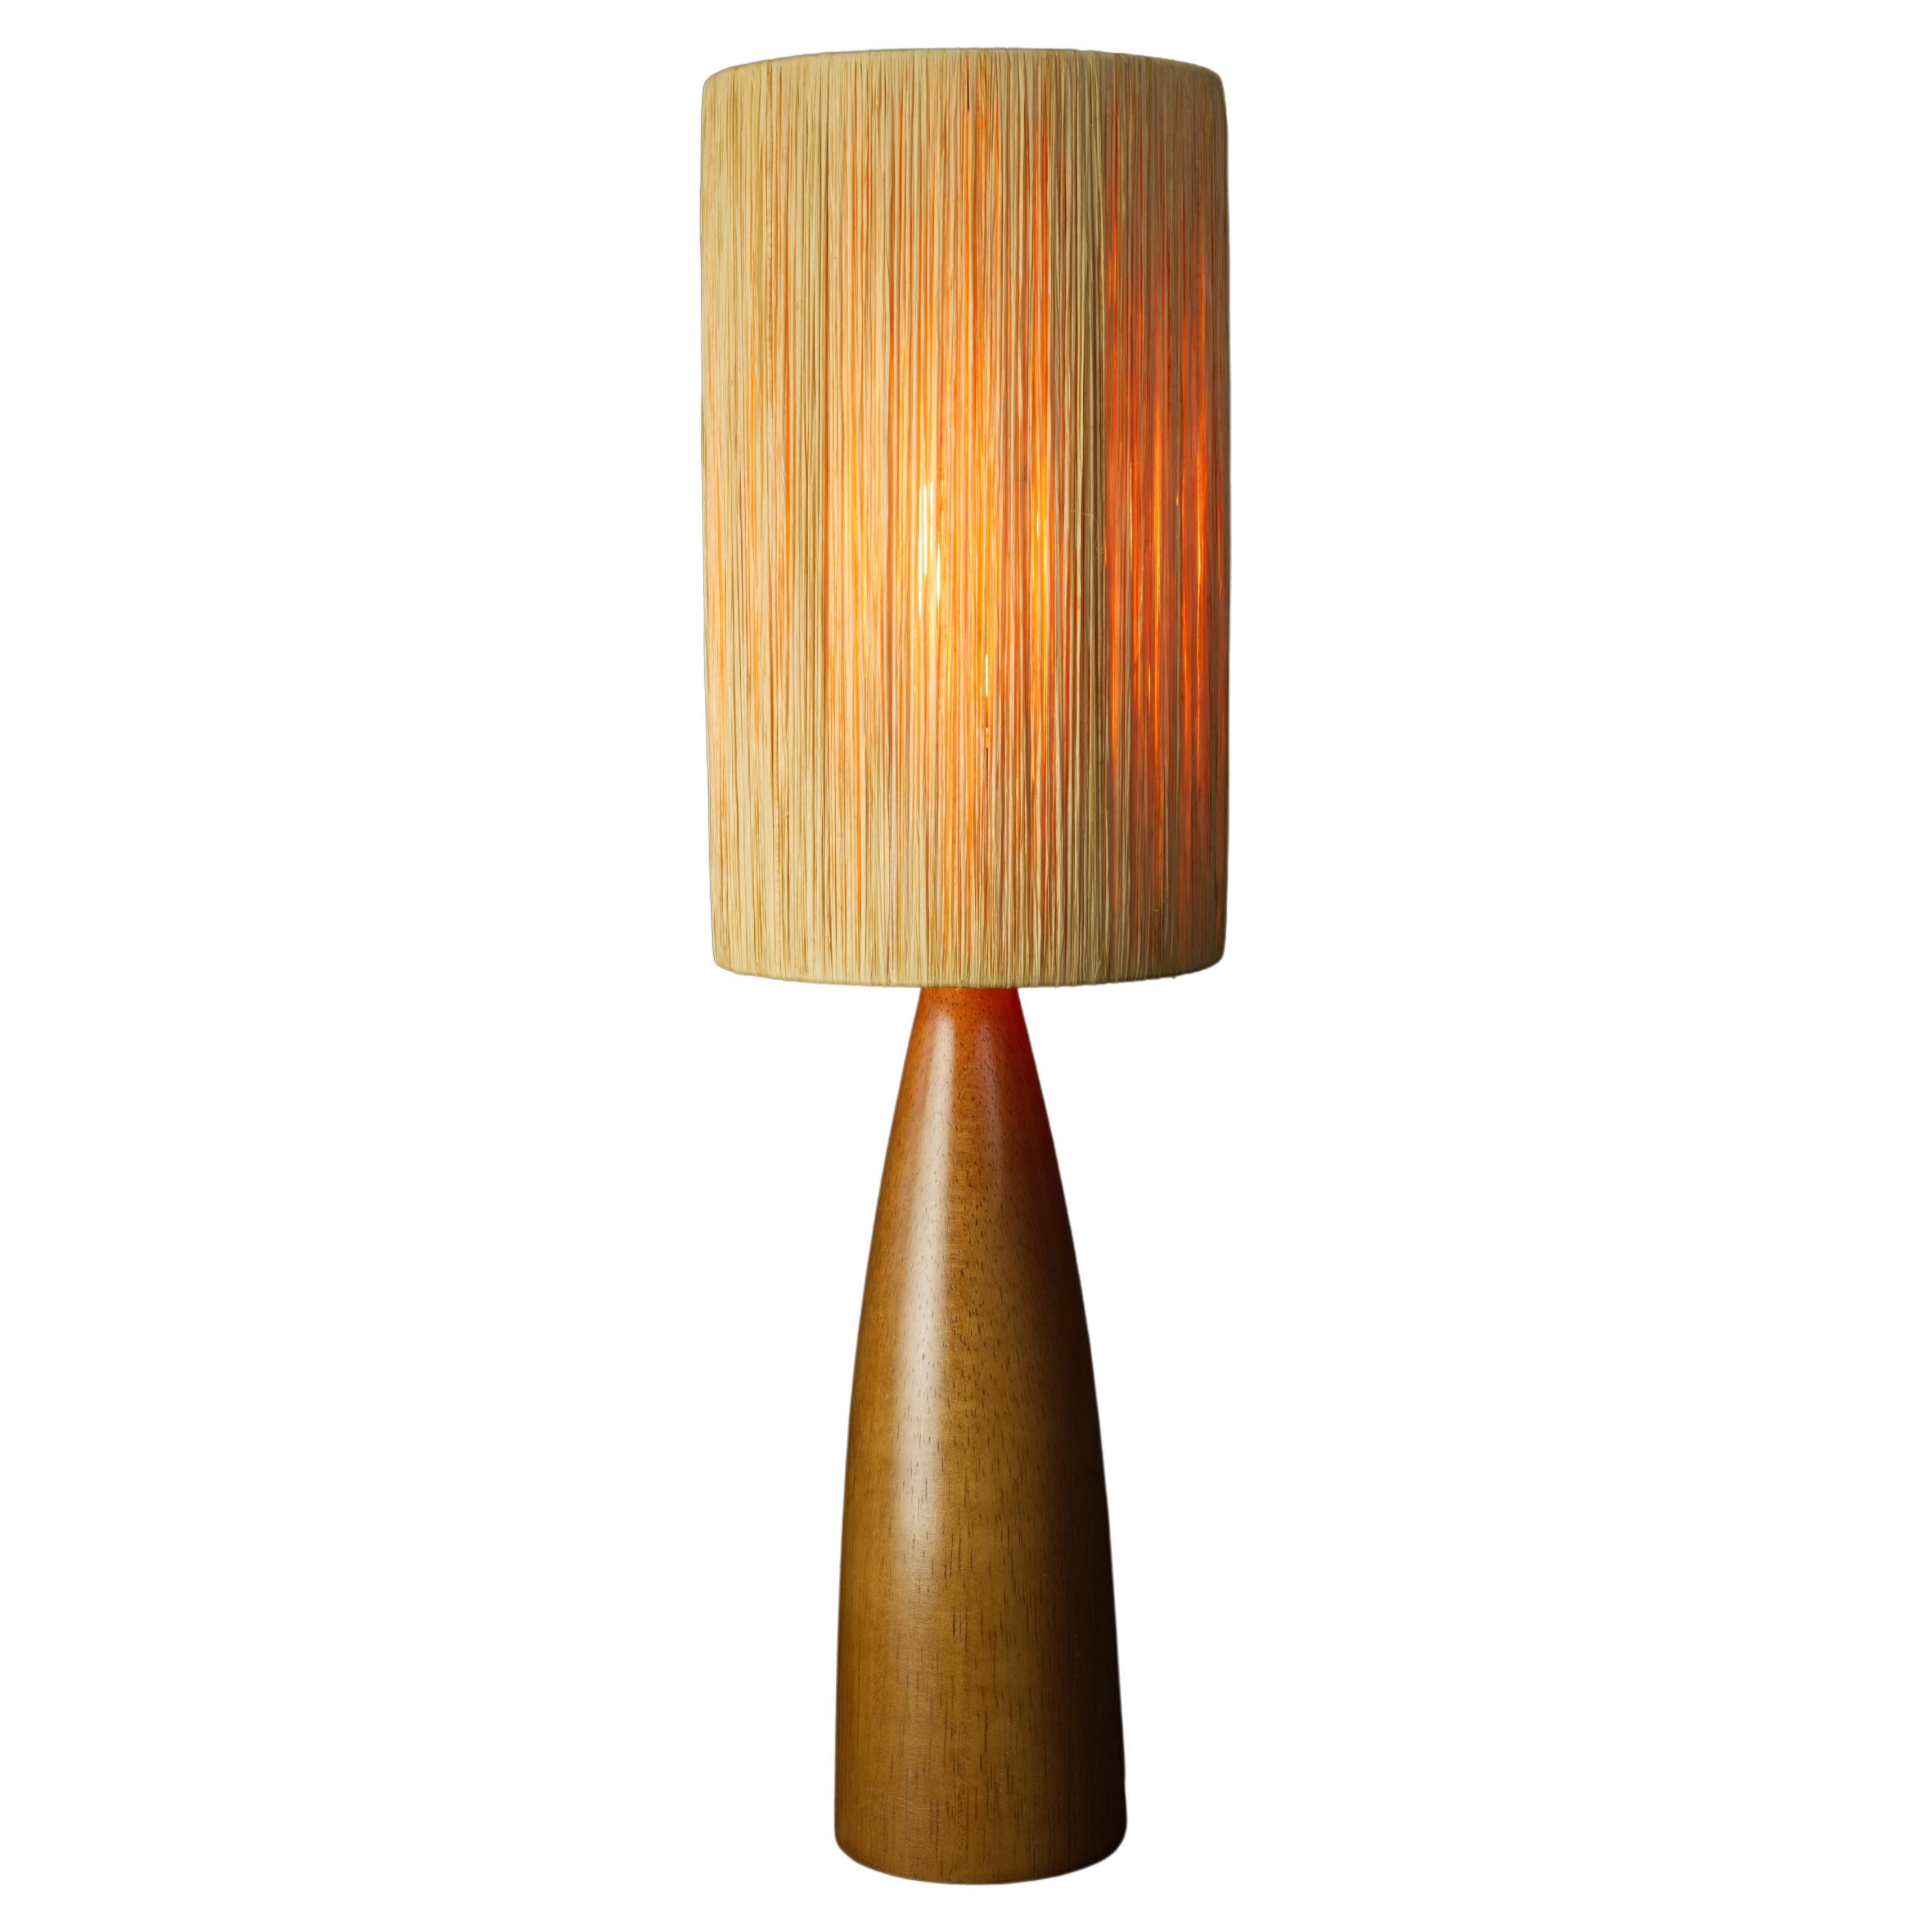 Scandinavian Modern Teak Accent Table Lamp with Original Straw Shade, Mid Centur For Sale